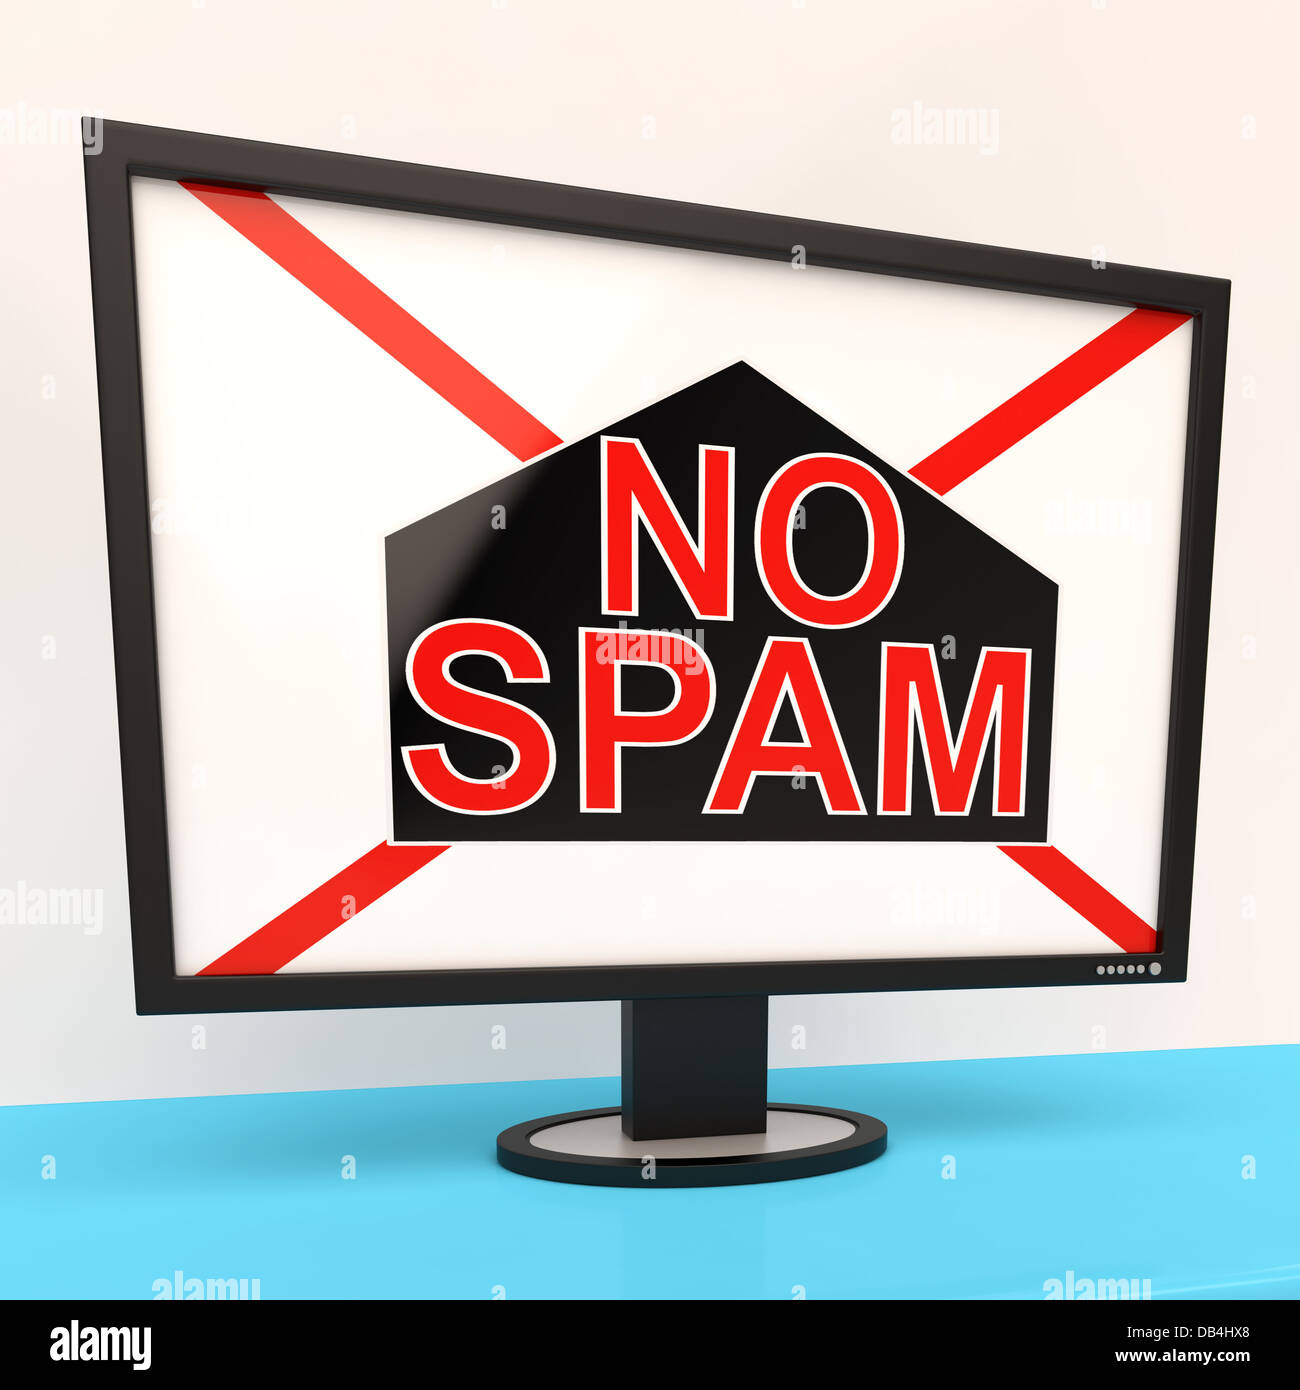 No Spam Shows Unwanted Undesired Trash Mail Stock Photo